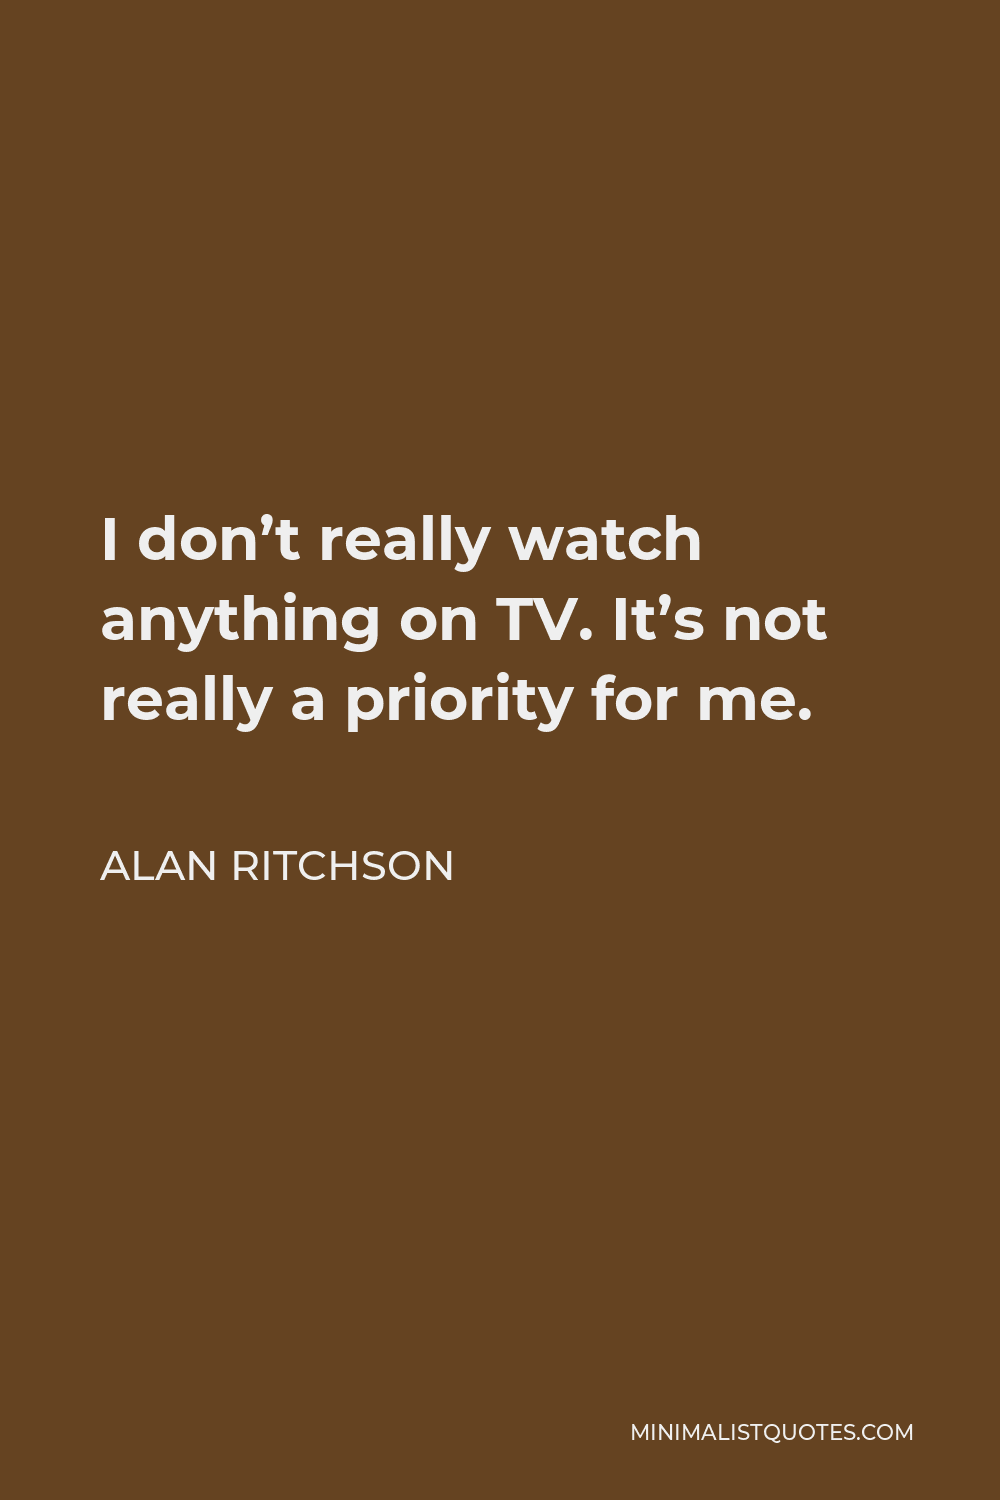 Alan Ritchson Quote - I don’t really watch anything on TV. It’s not really a priority for me.